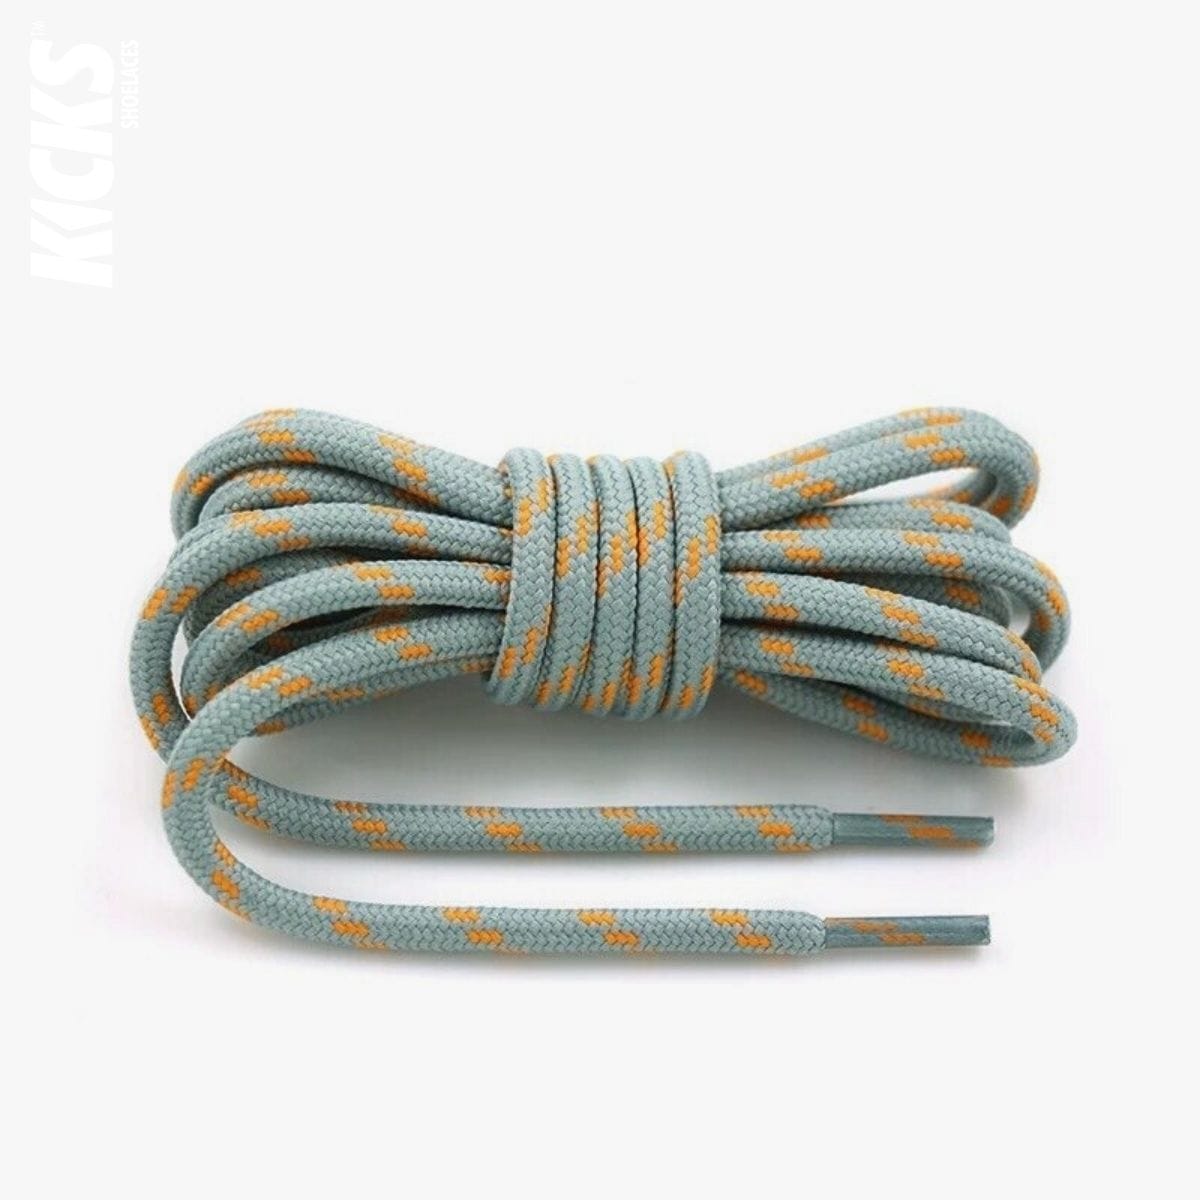 trekking-shoe-laces-united-states-in-light-grey-and-orange-shop-online